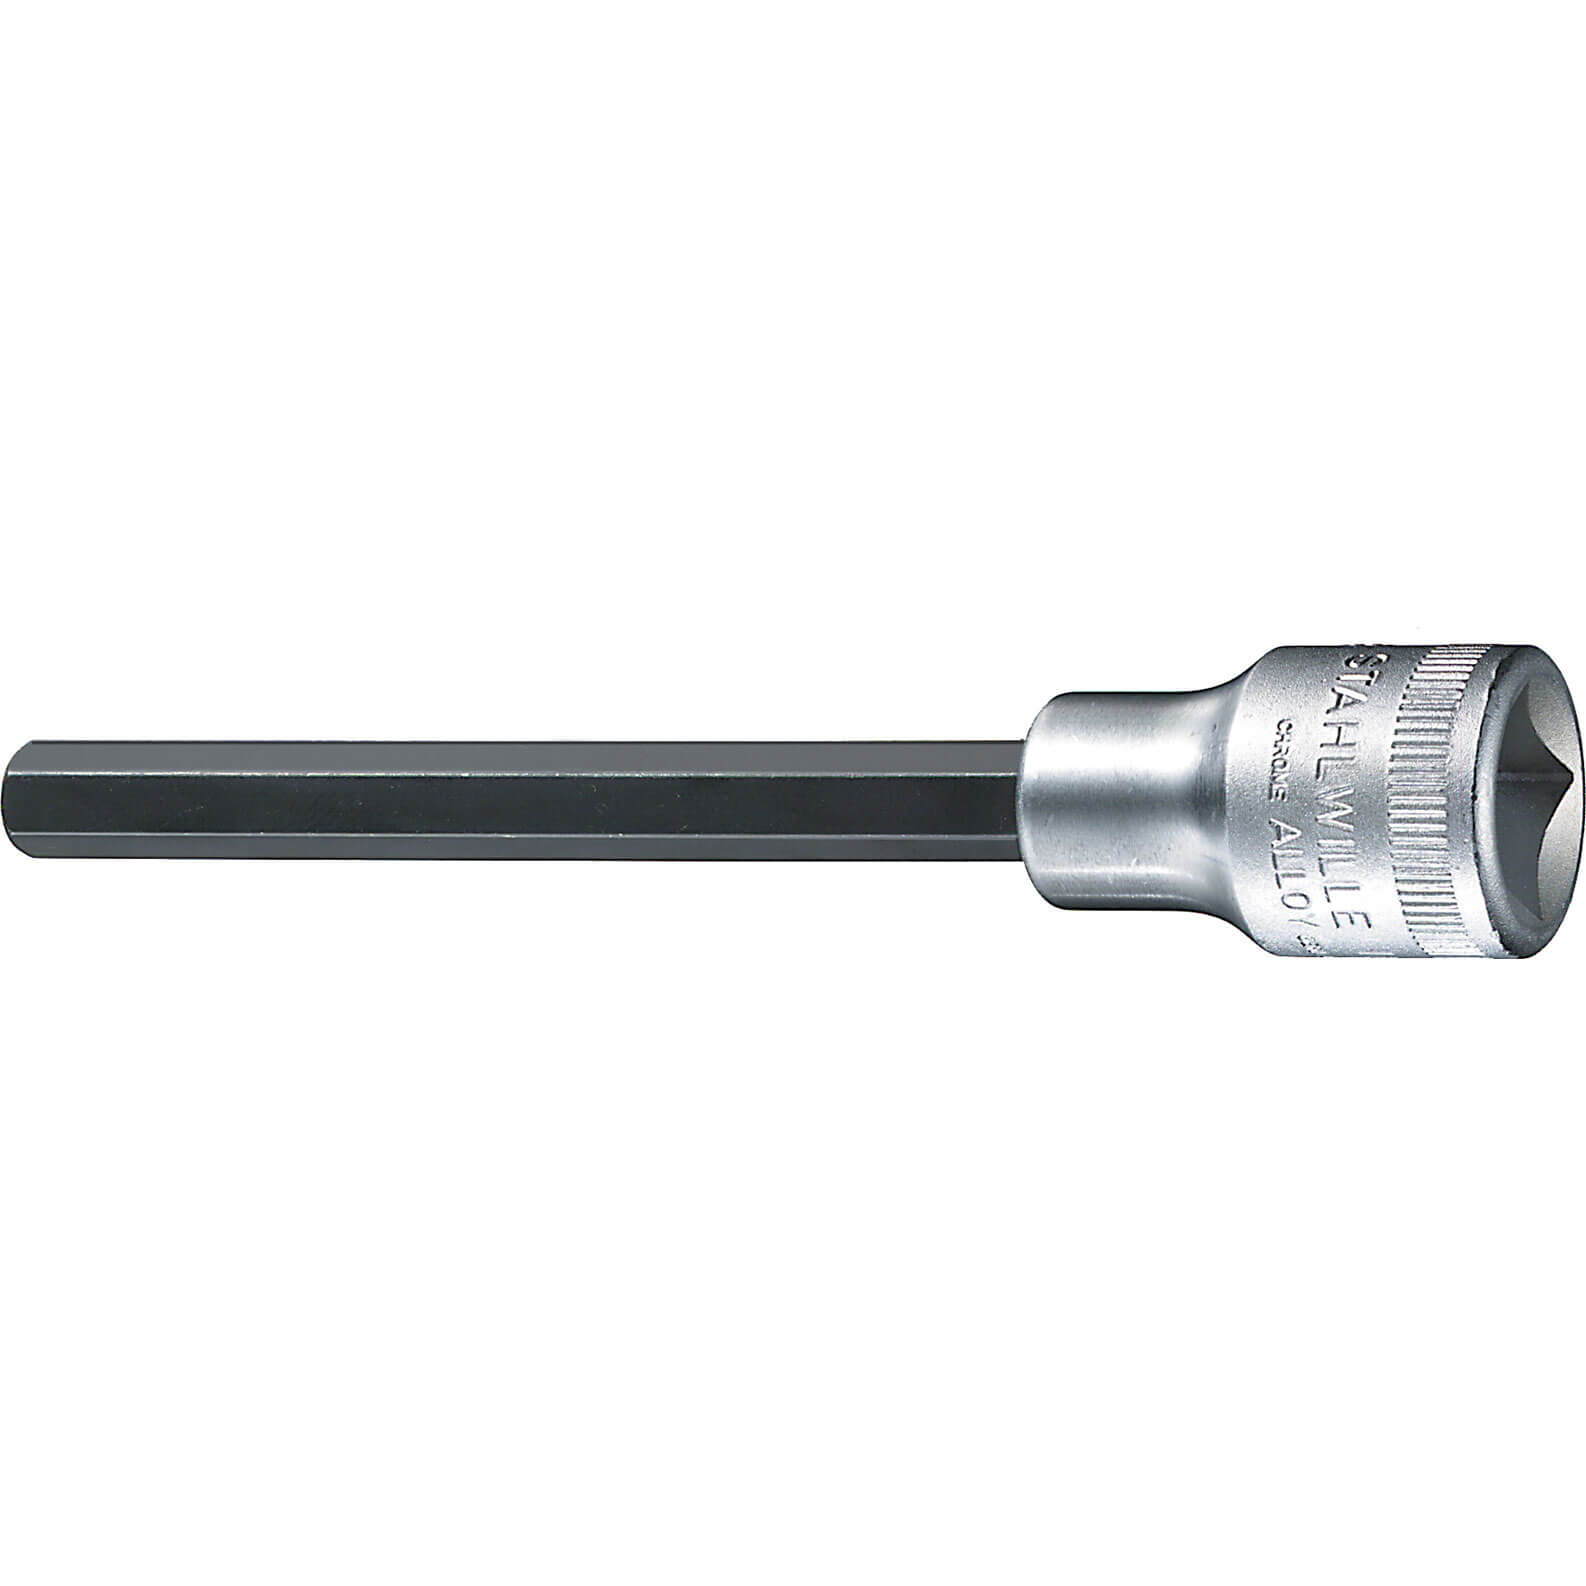 Image of Stahlwille 1/2" Drive Extra Long Hexagon Socket Bit 1/2" 10mm